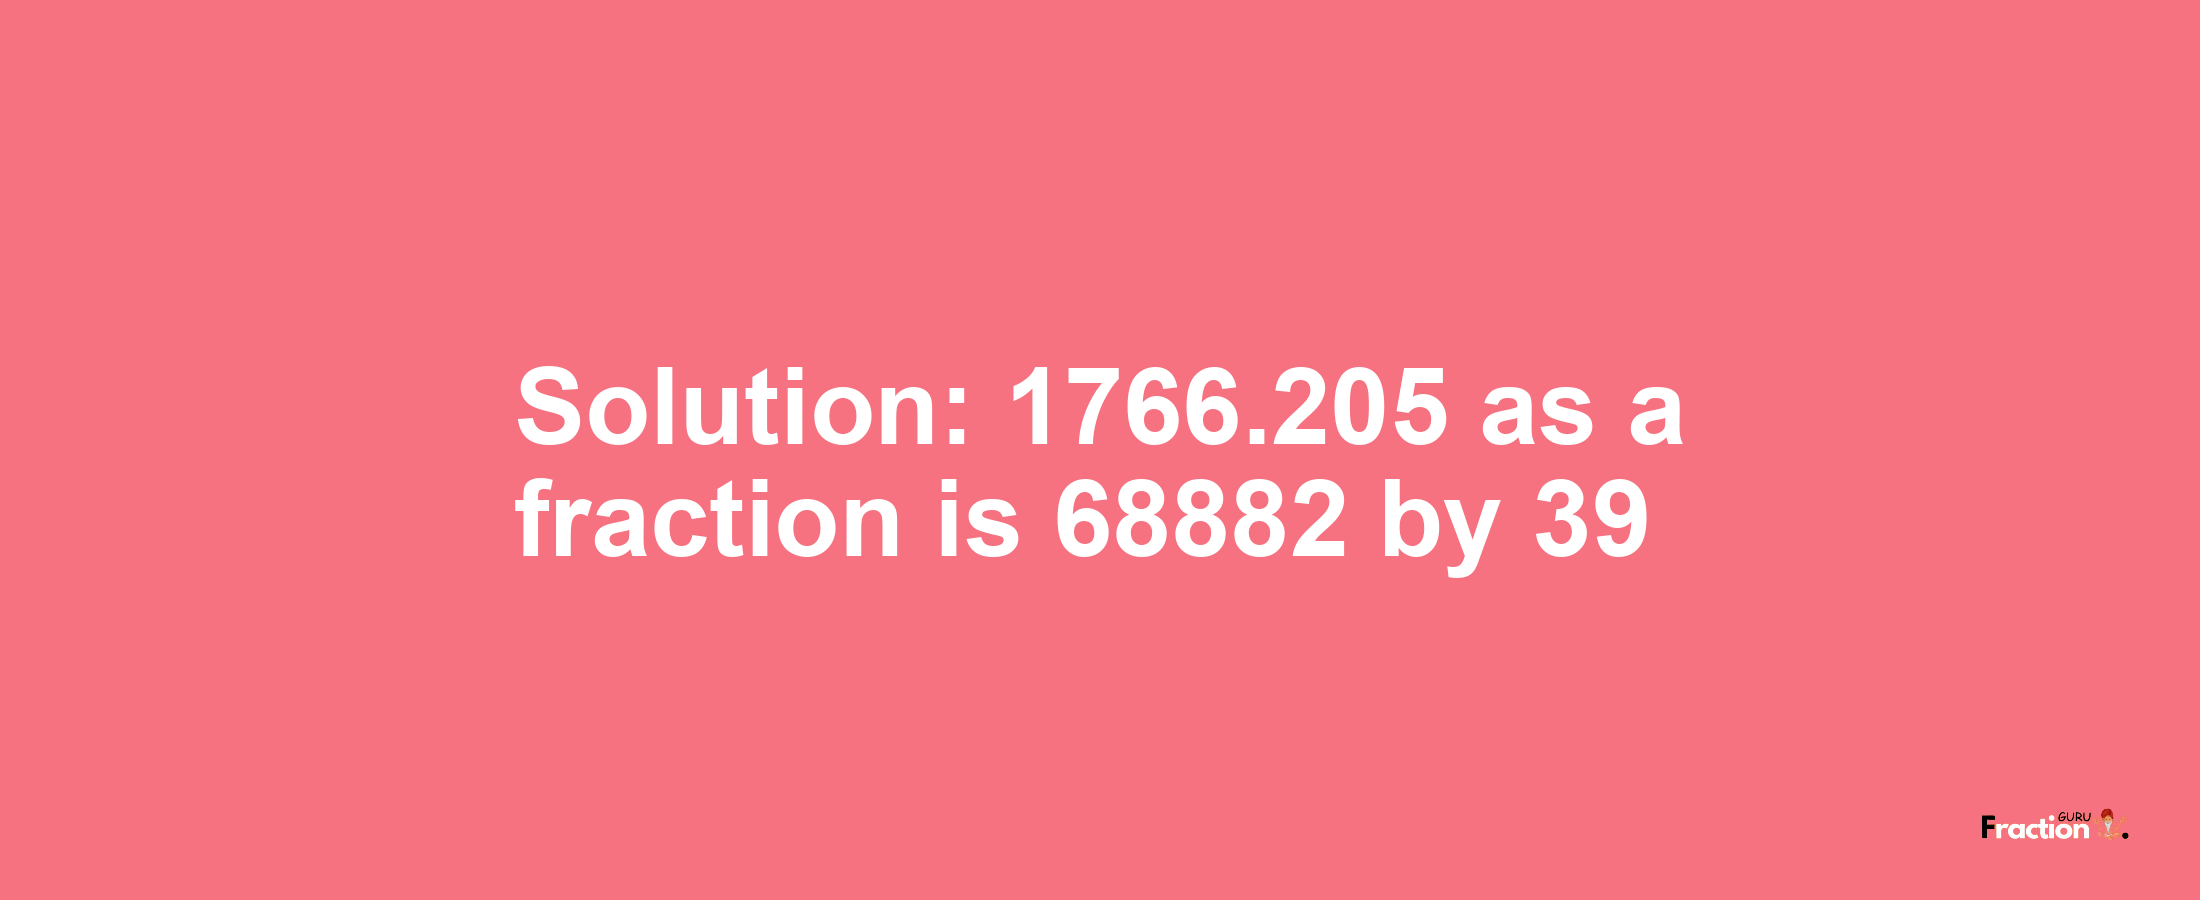 Solution:1766.205 as a fraction is 68882/39